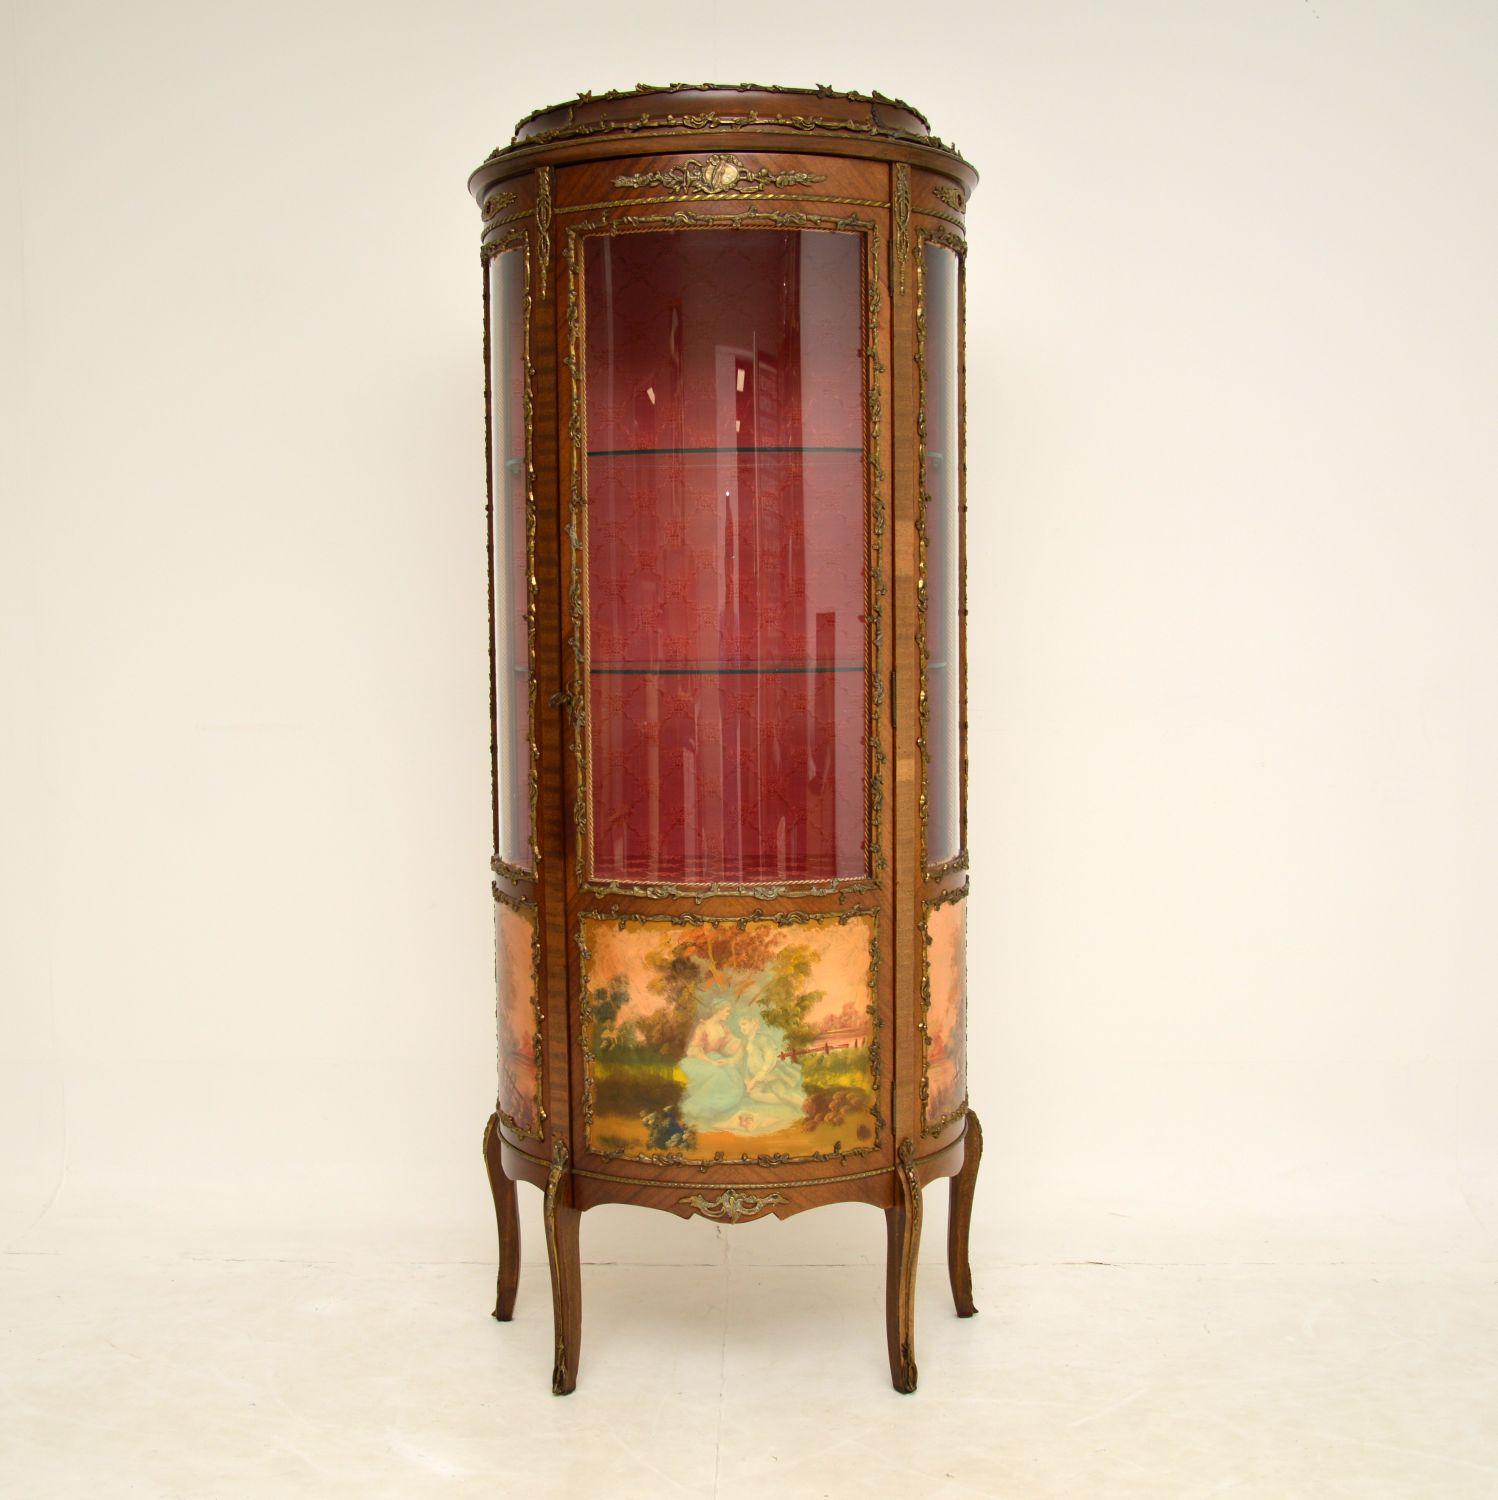 A stunning painted and ormolu mounted antique French style display cabinet, which we would dates from around the 1930’s period.

It is of lovely quality, with a finely made curved glass front and sides. The wood has stunning gilt bronze mounts all